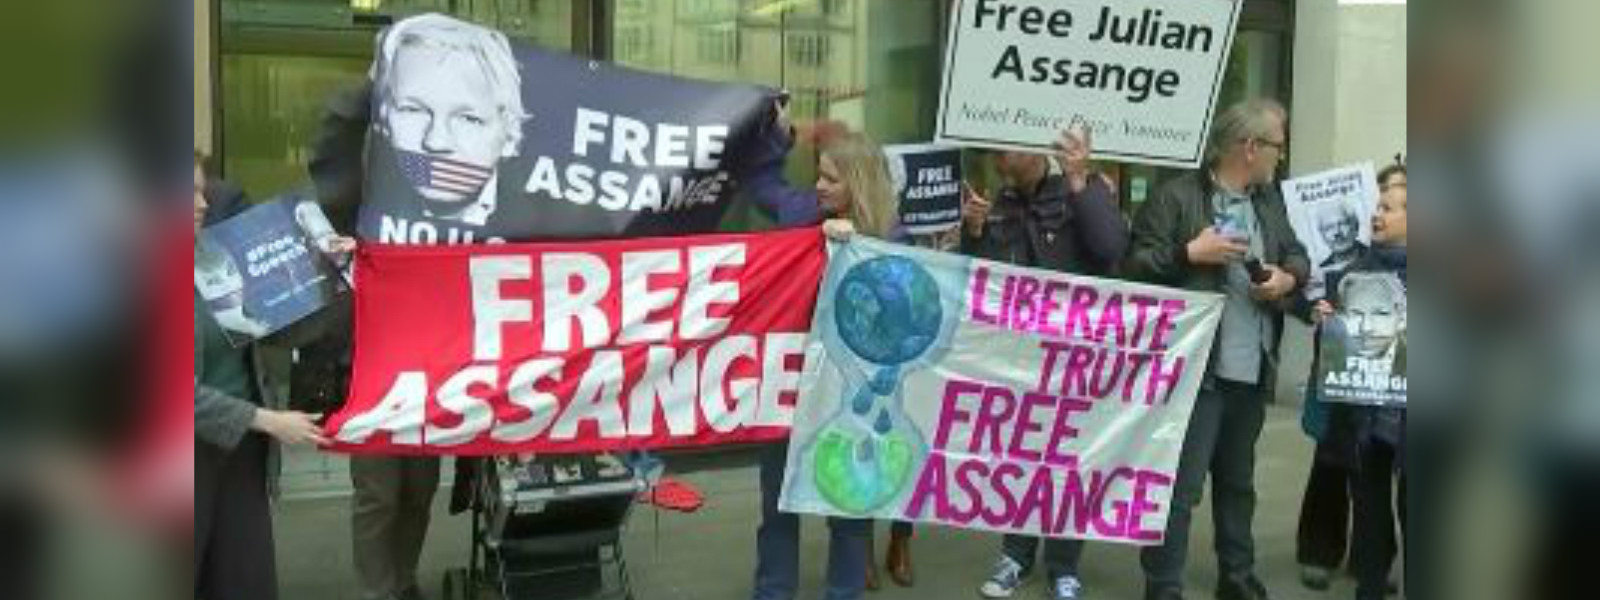 Protesters demand Assange release